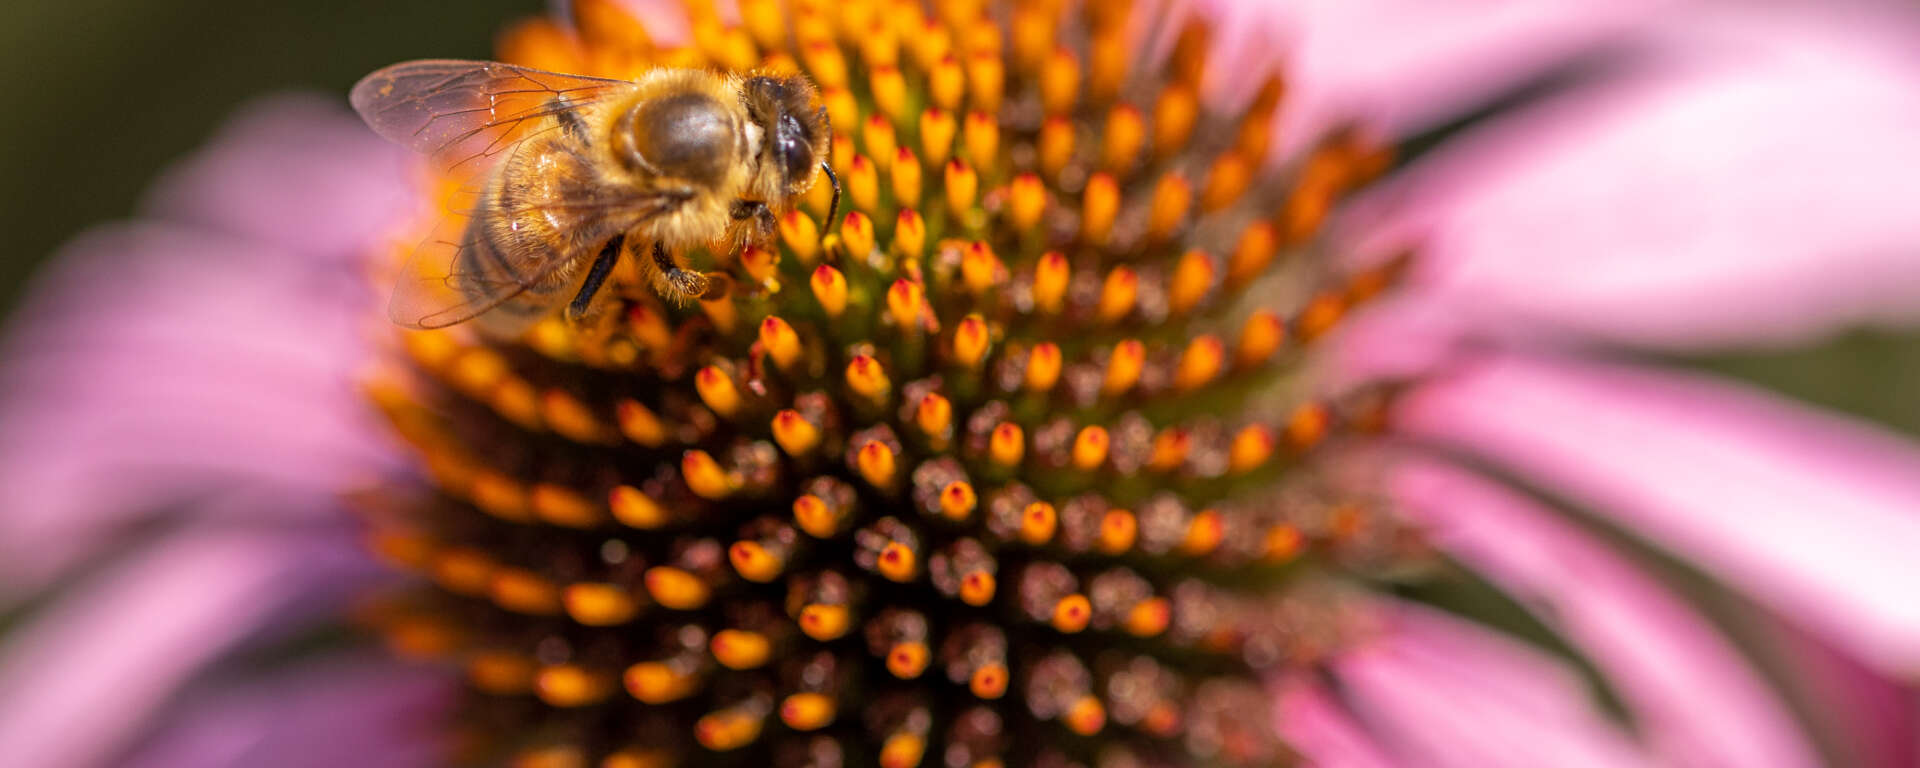 A honey bee hard at work on a coneflower. Photo Credit: Mark Pressler